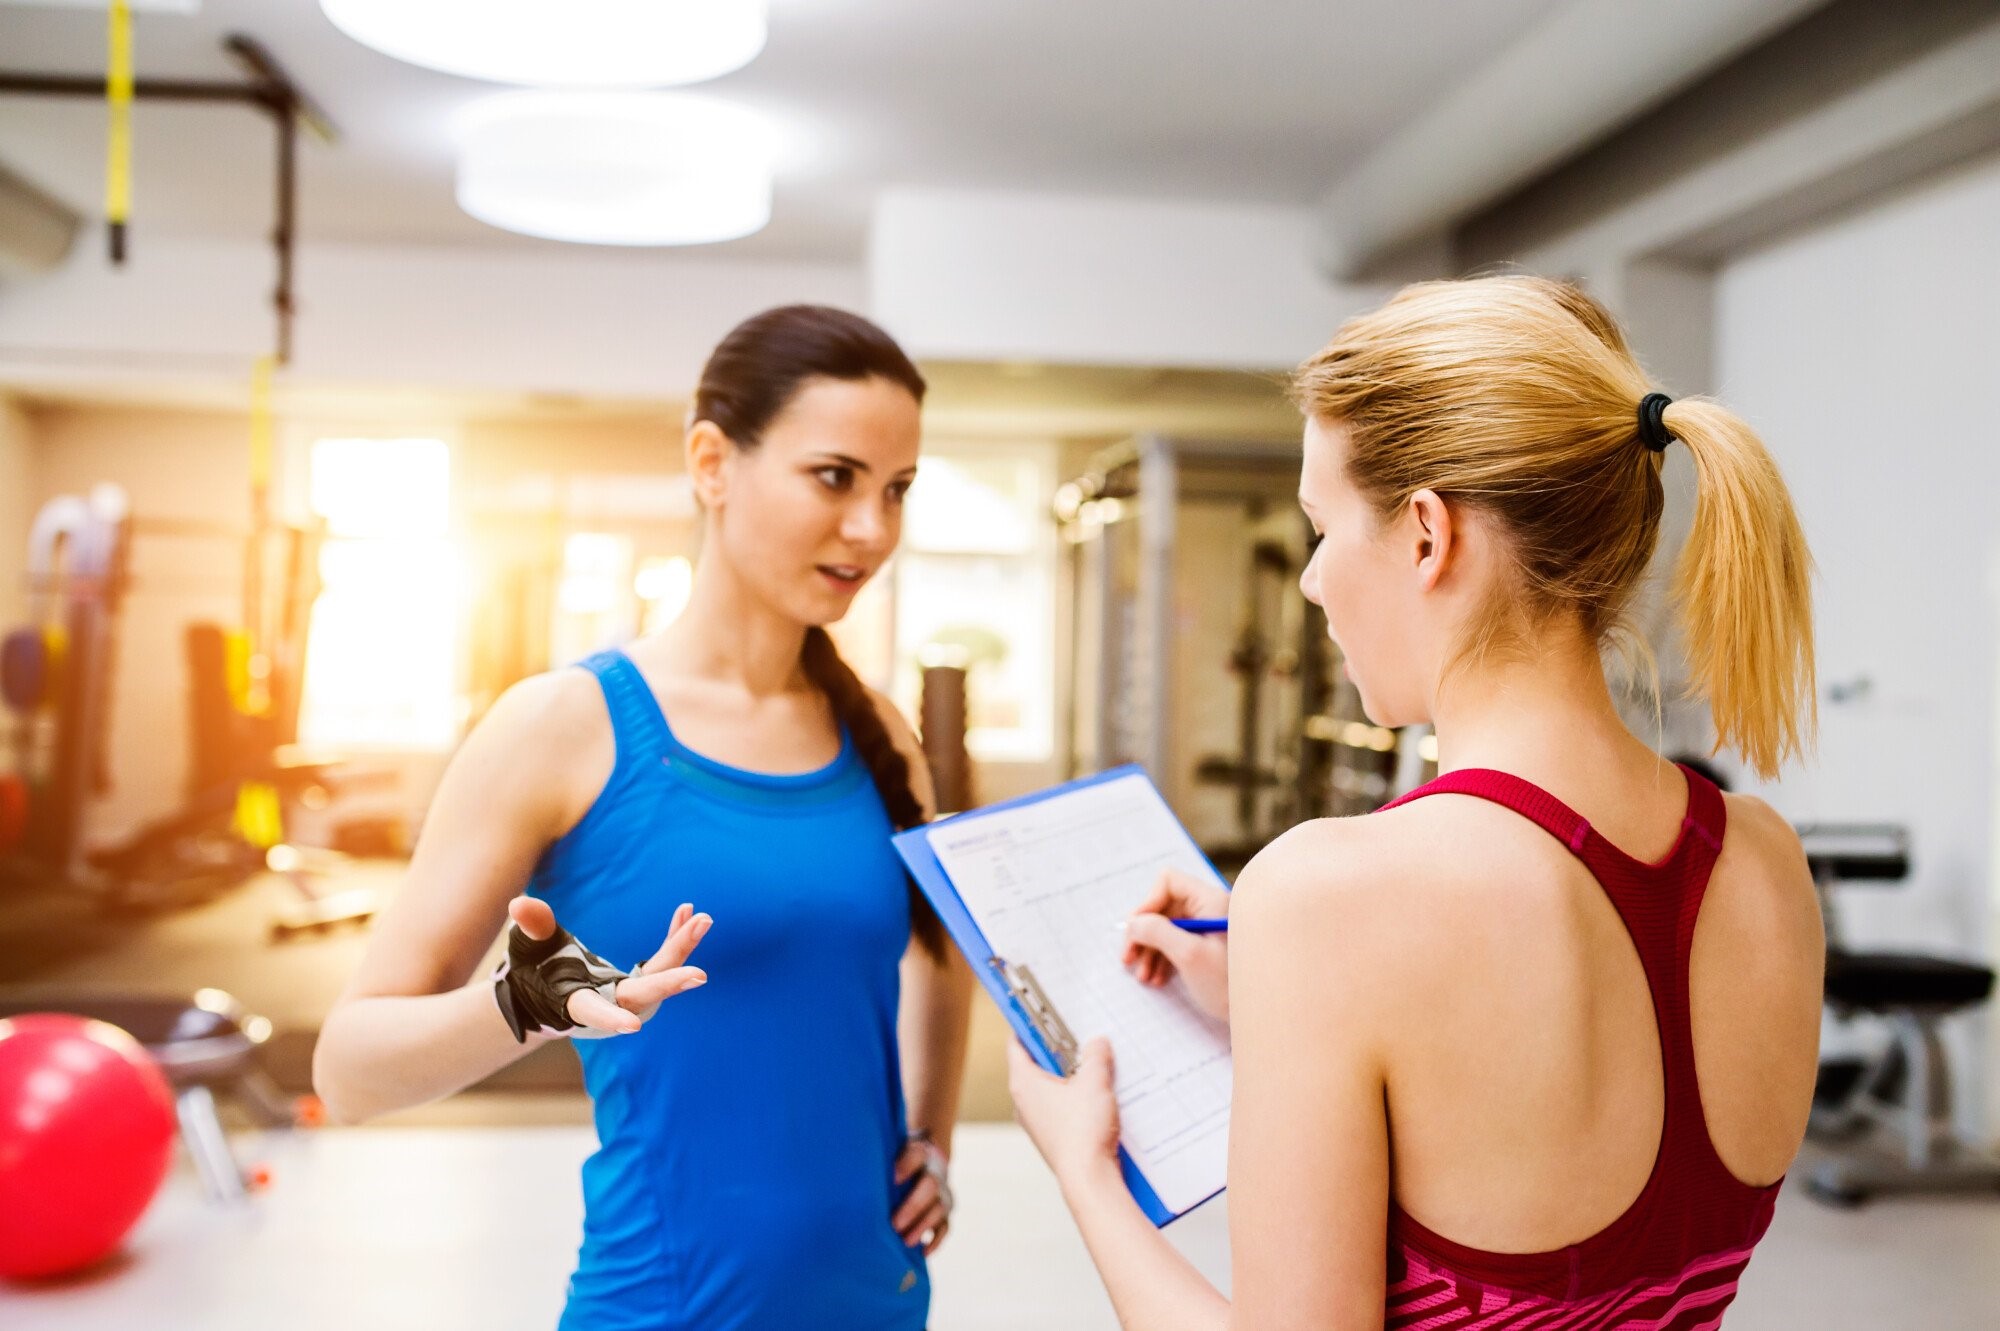 Fitness Instructor Resume and Certification Showcasing Expertise